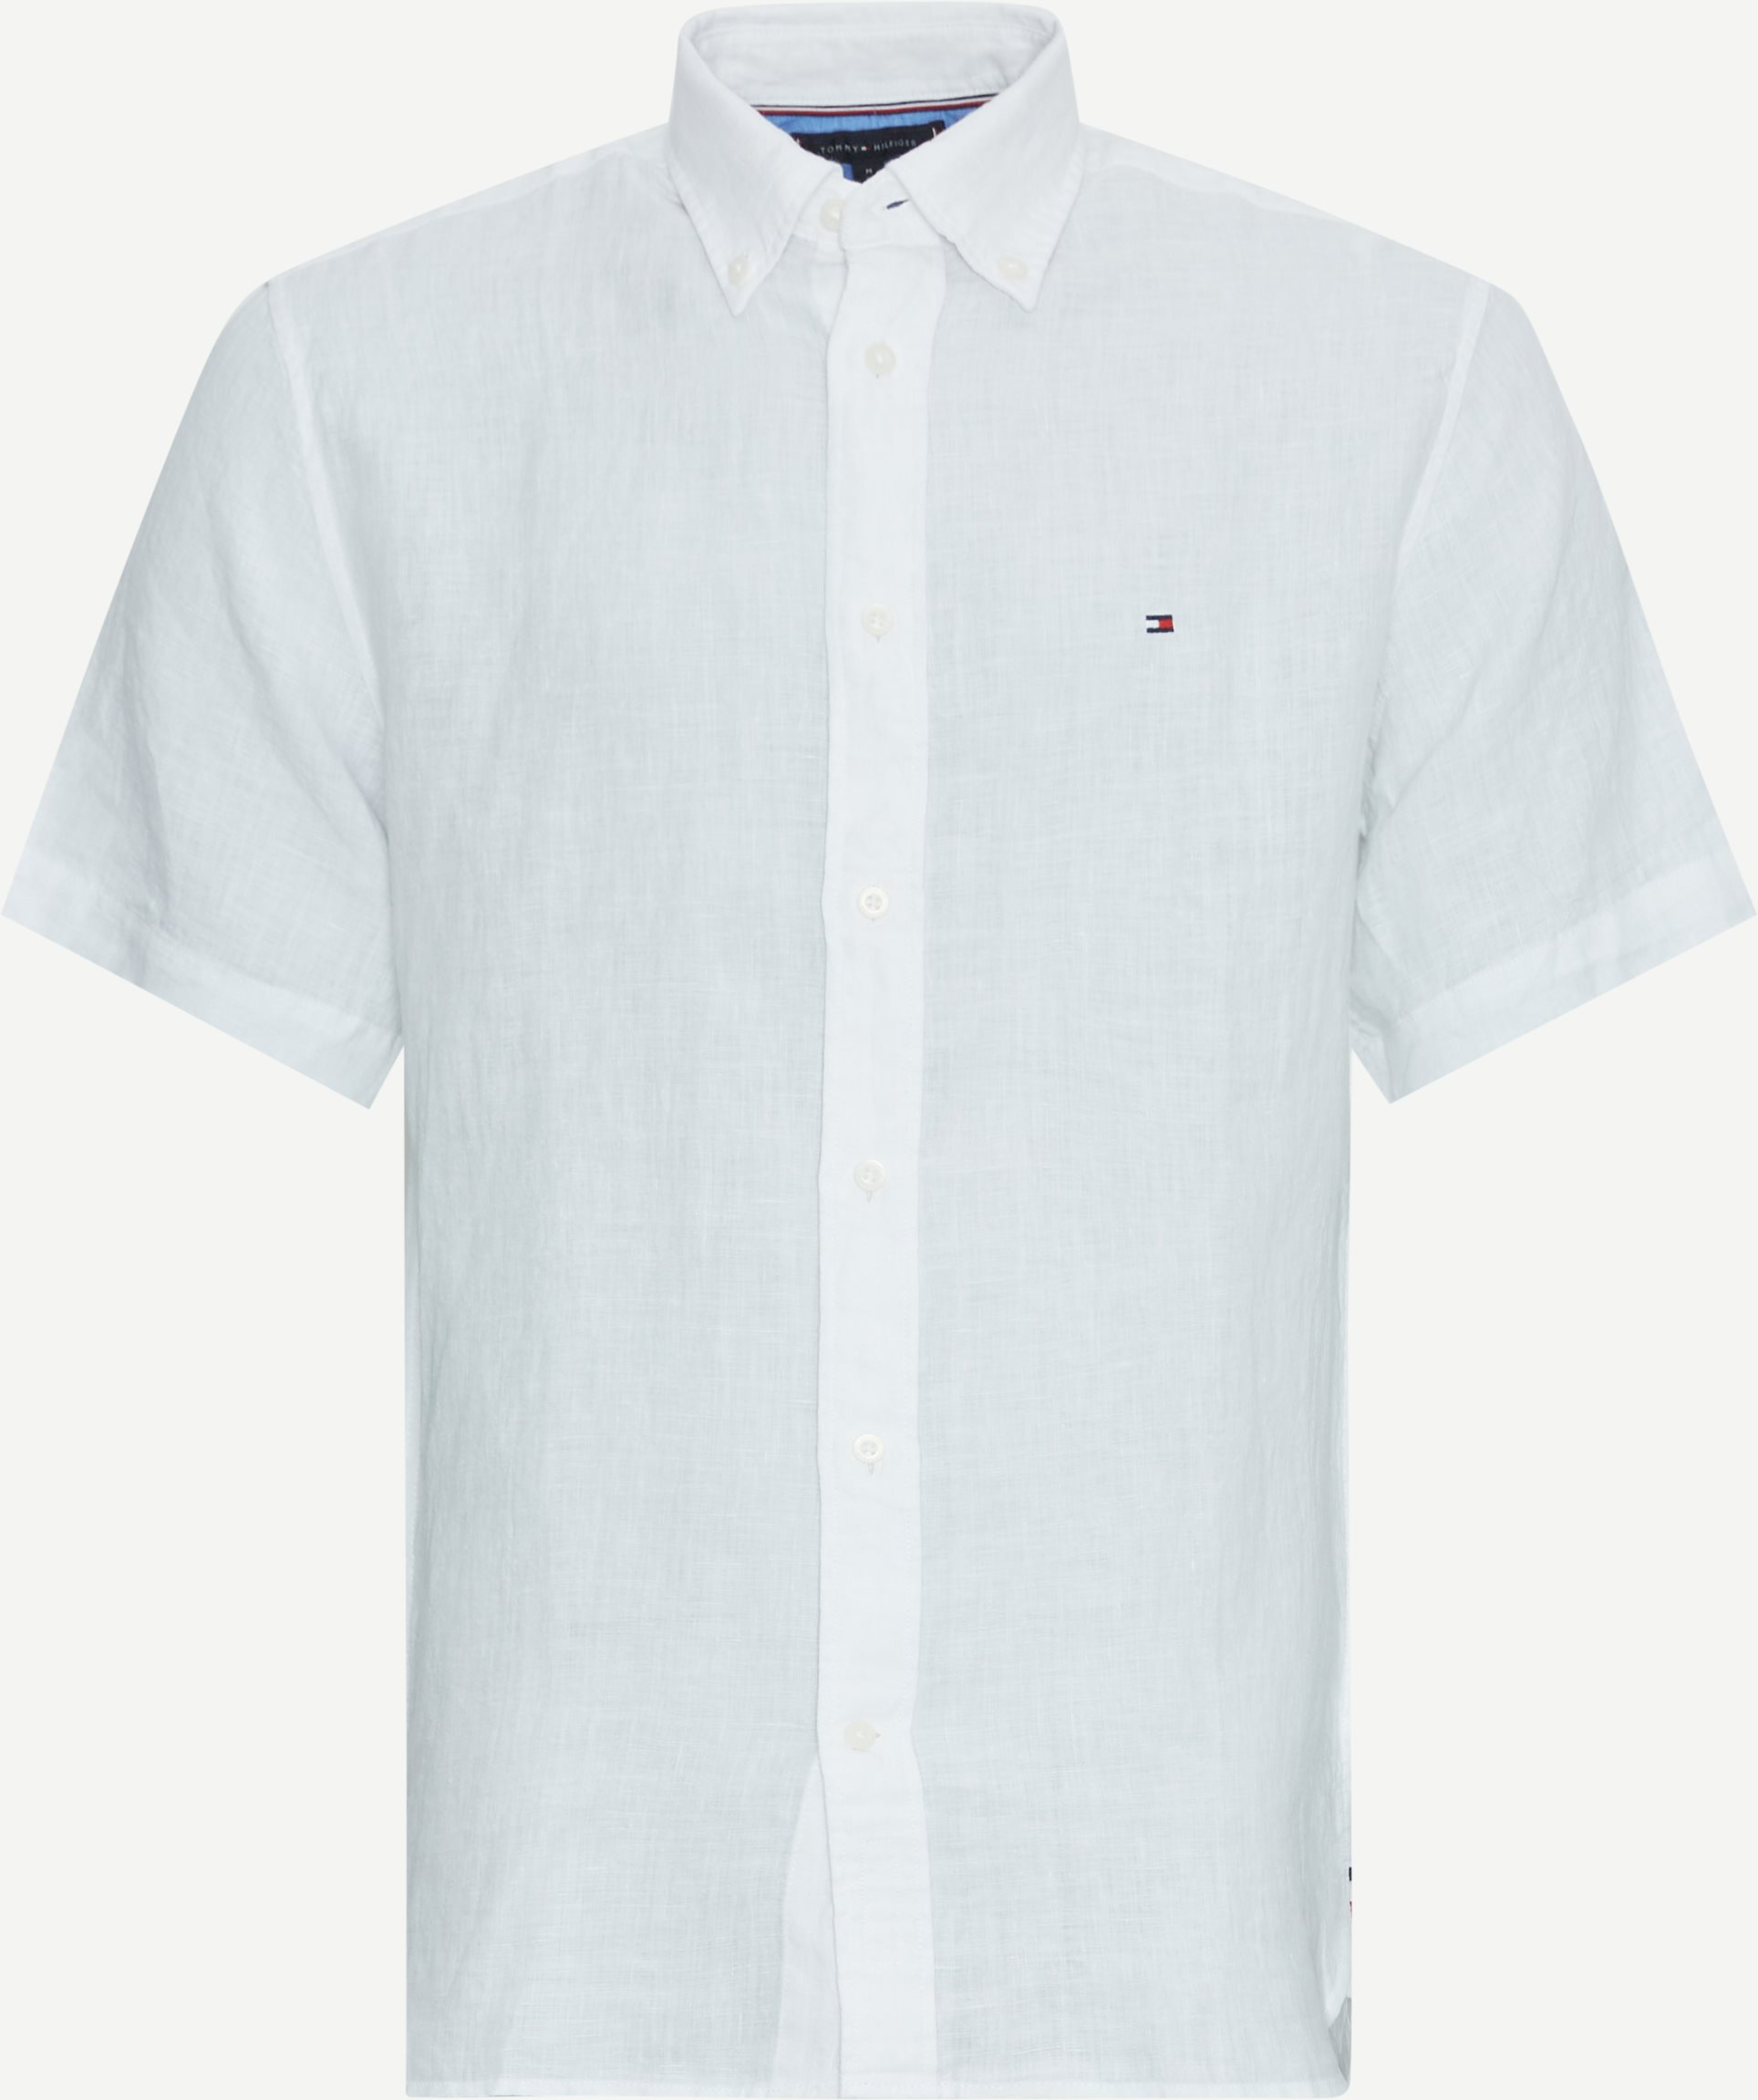 Tommy Hilfiger Linen shirts 35207 PIGMENT DYED LINEN RF SHIRT S/S White